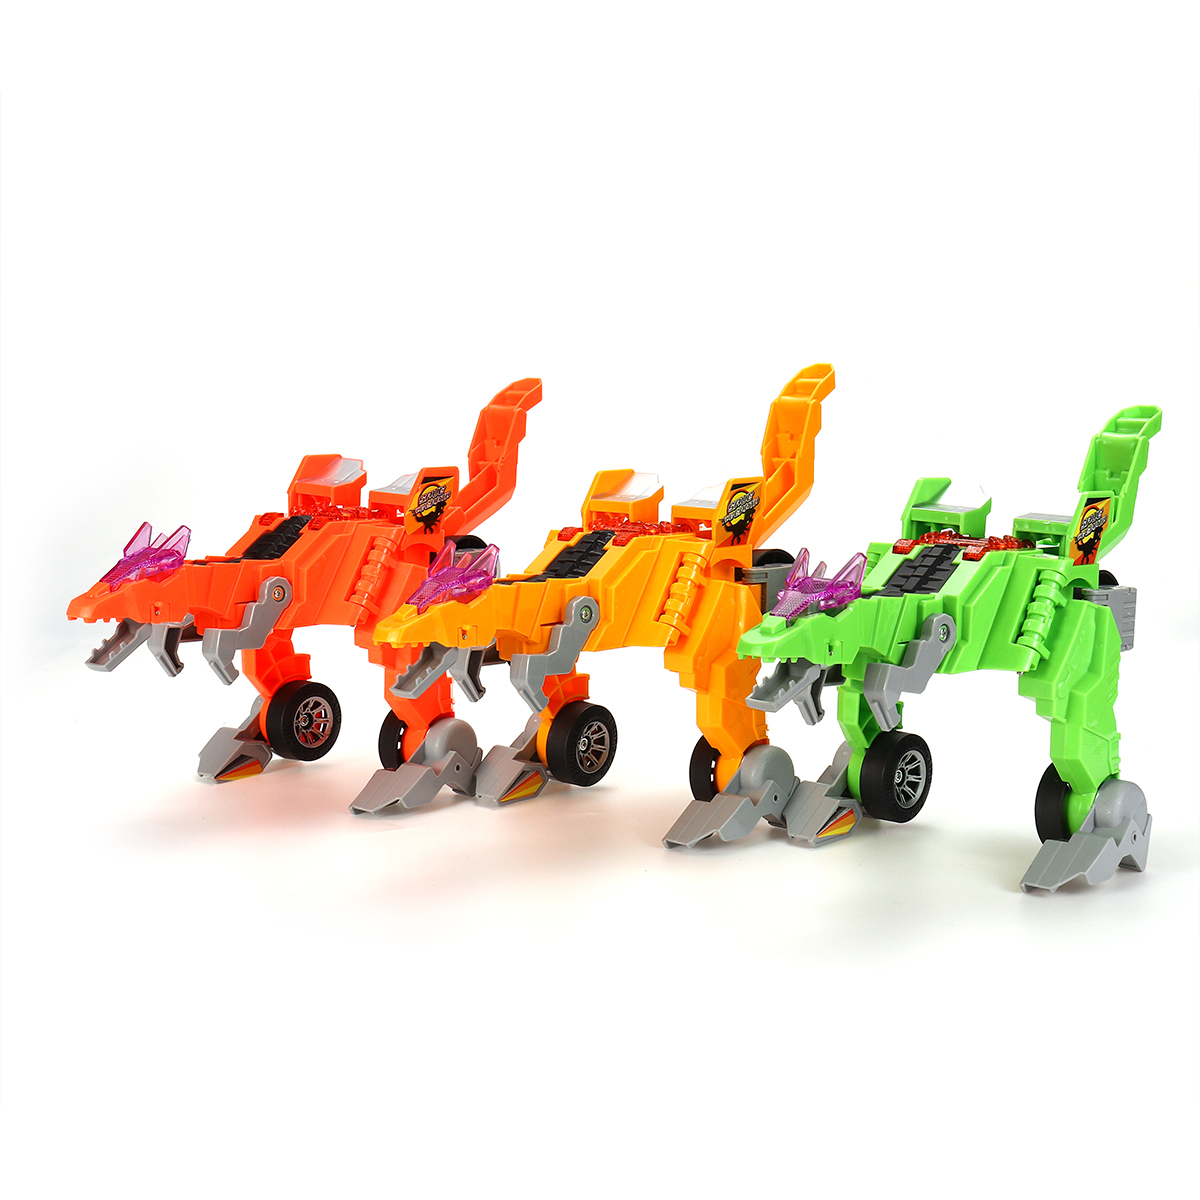 Electric-Transforming-T-Rex-Dinosaur-LED-Car-with-Light-Sound-Diecast-Model-Toy-1591202-5